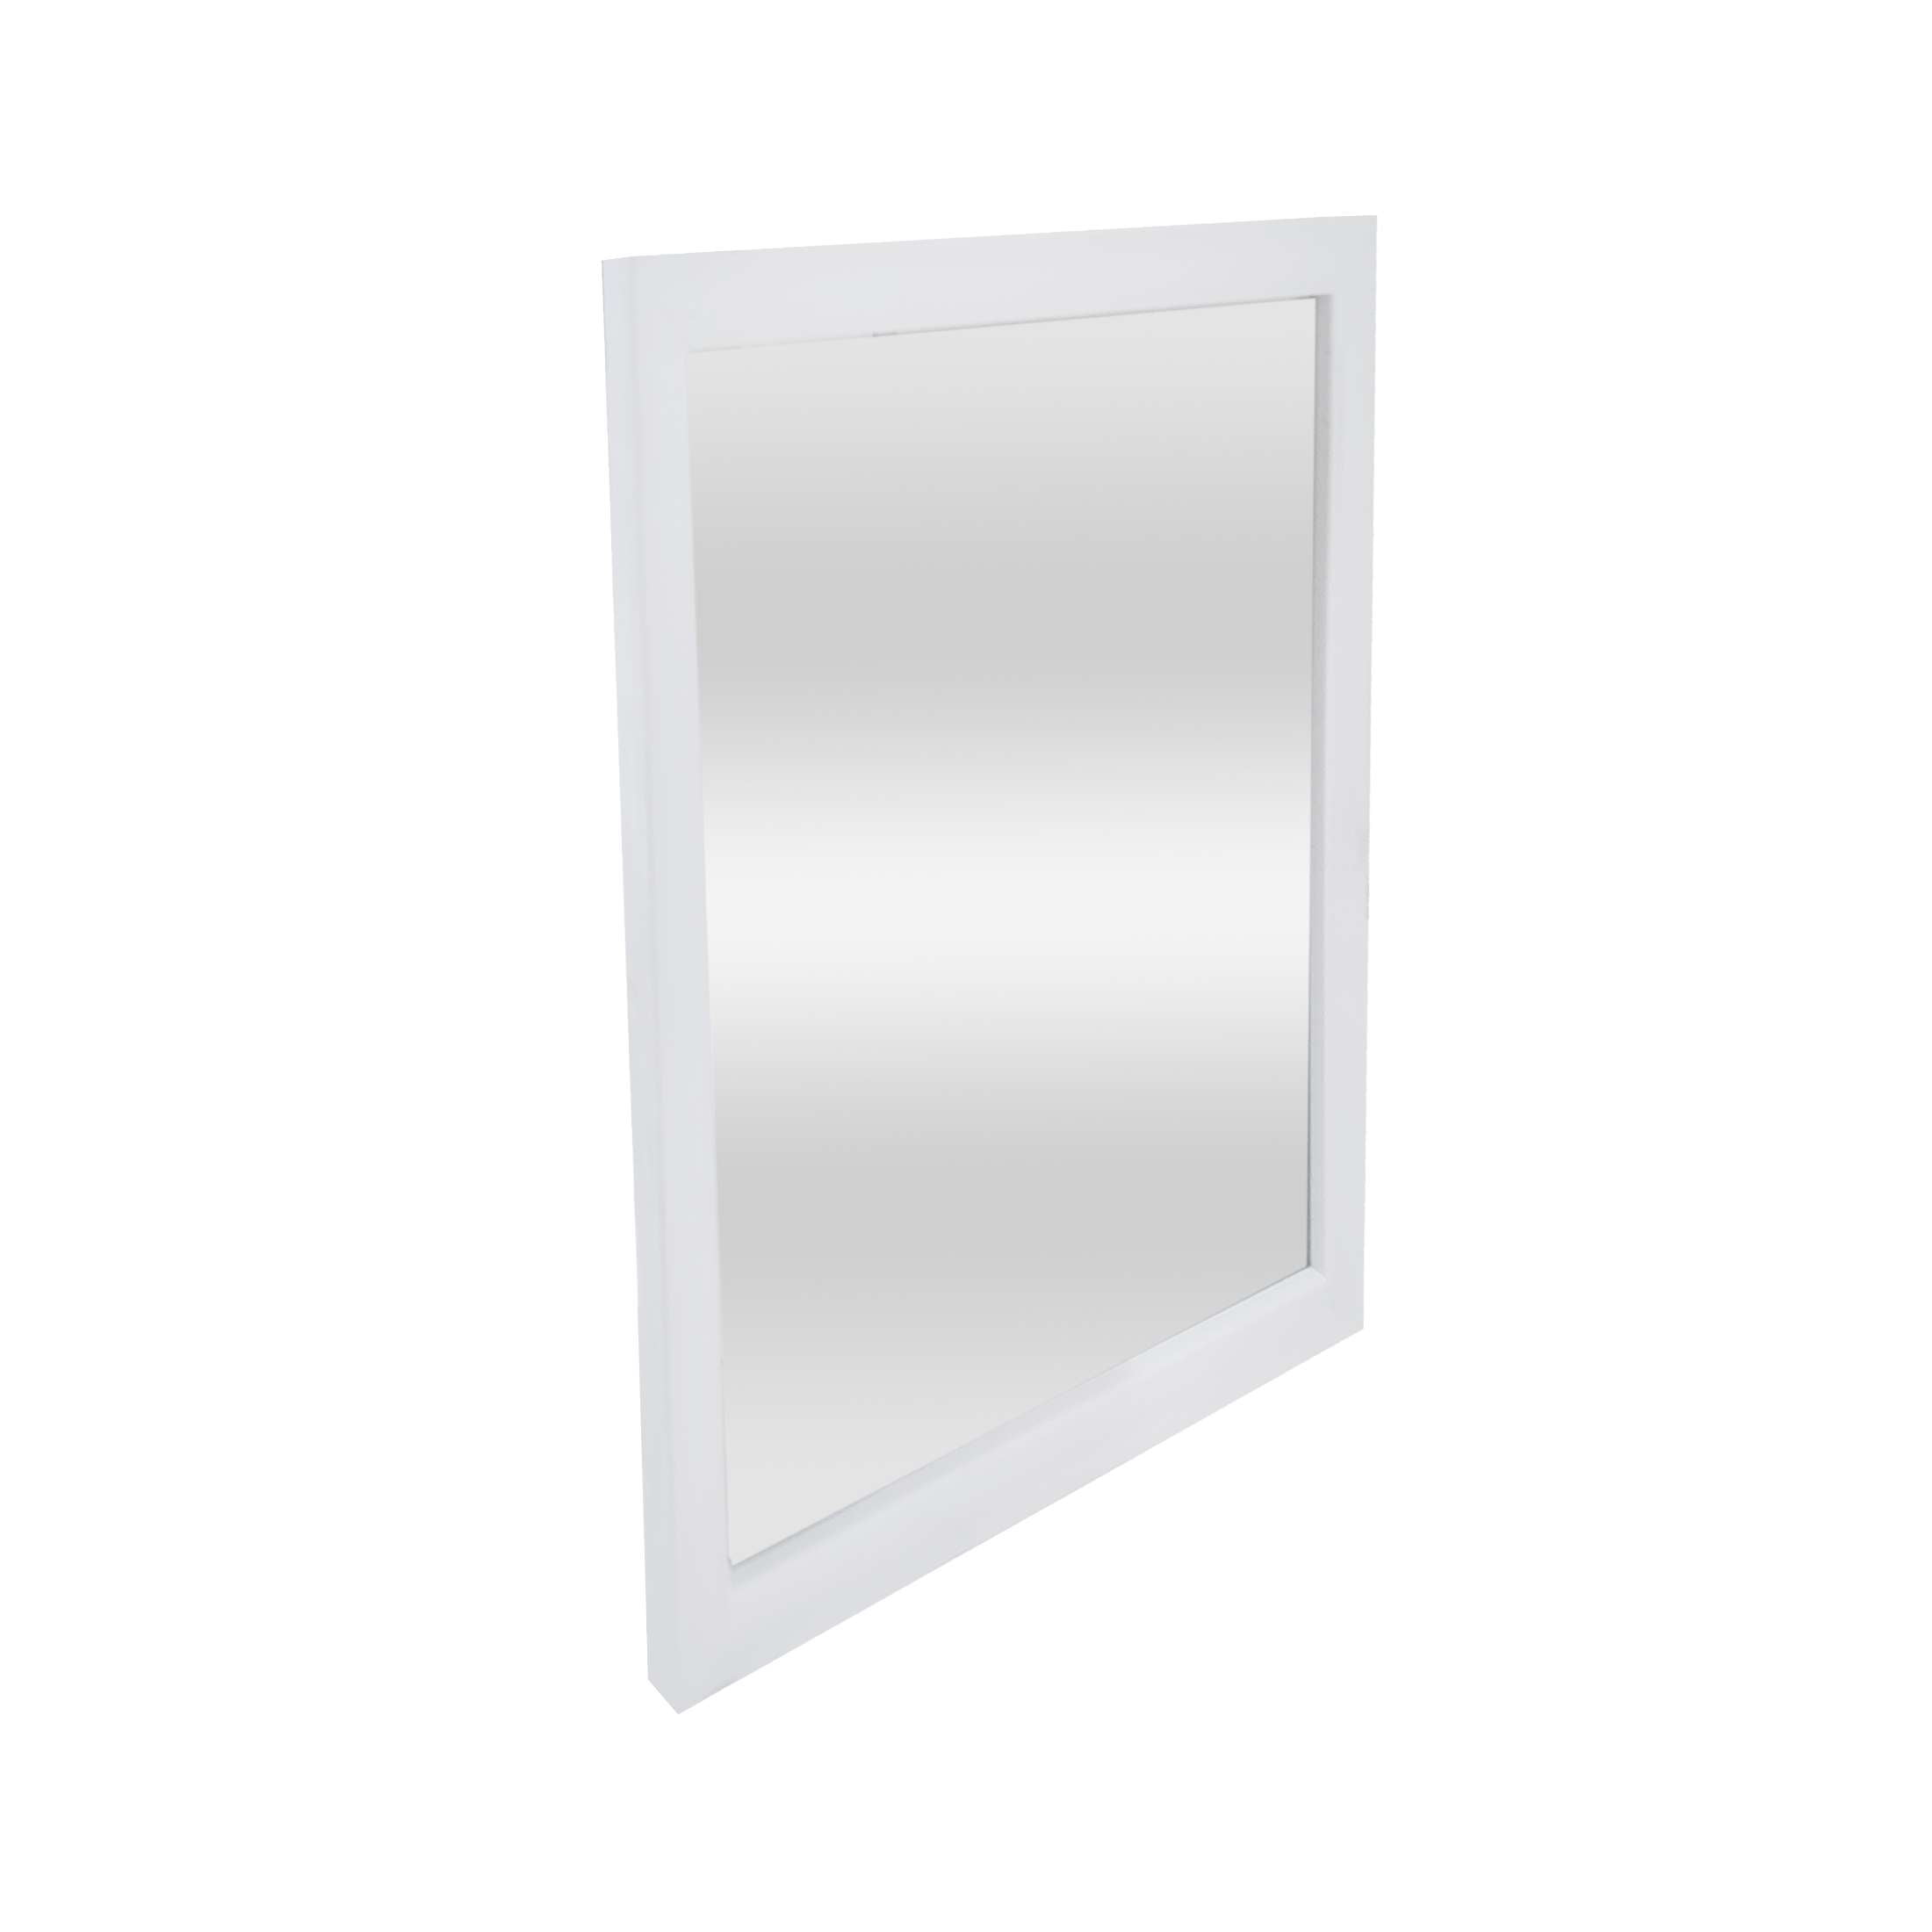 Mainstays Wall Mirror Square, 16In X 16In, Black 